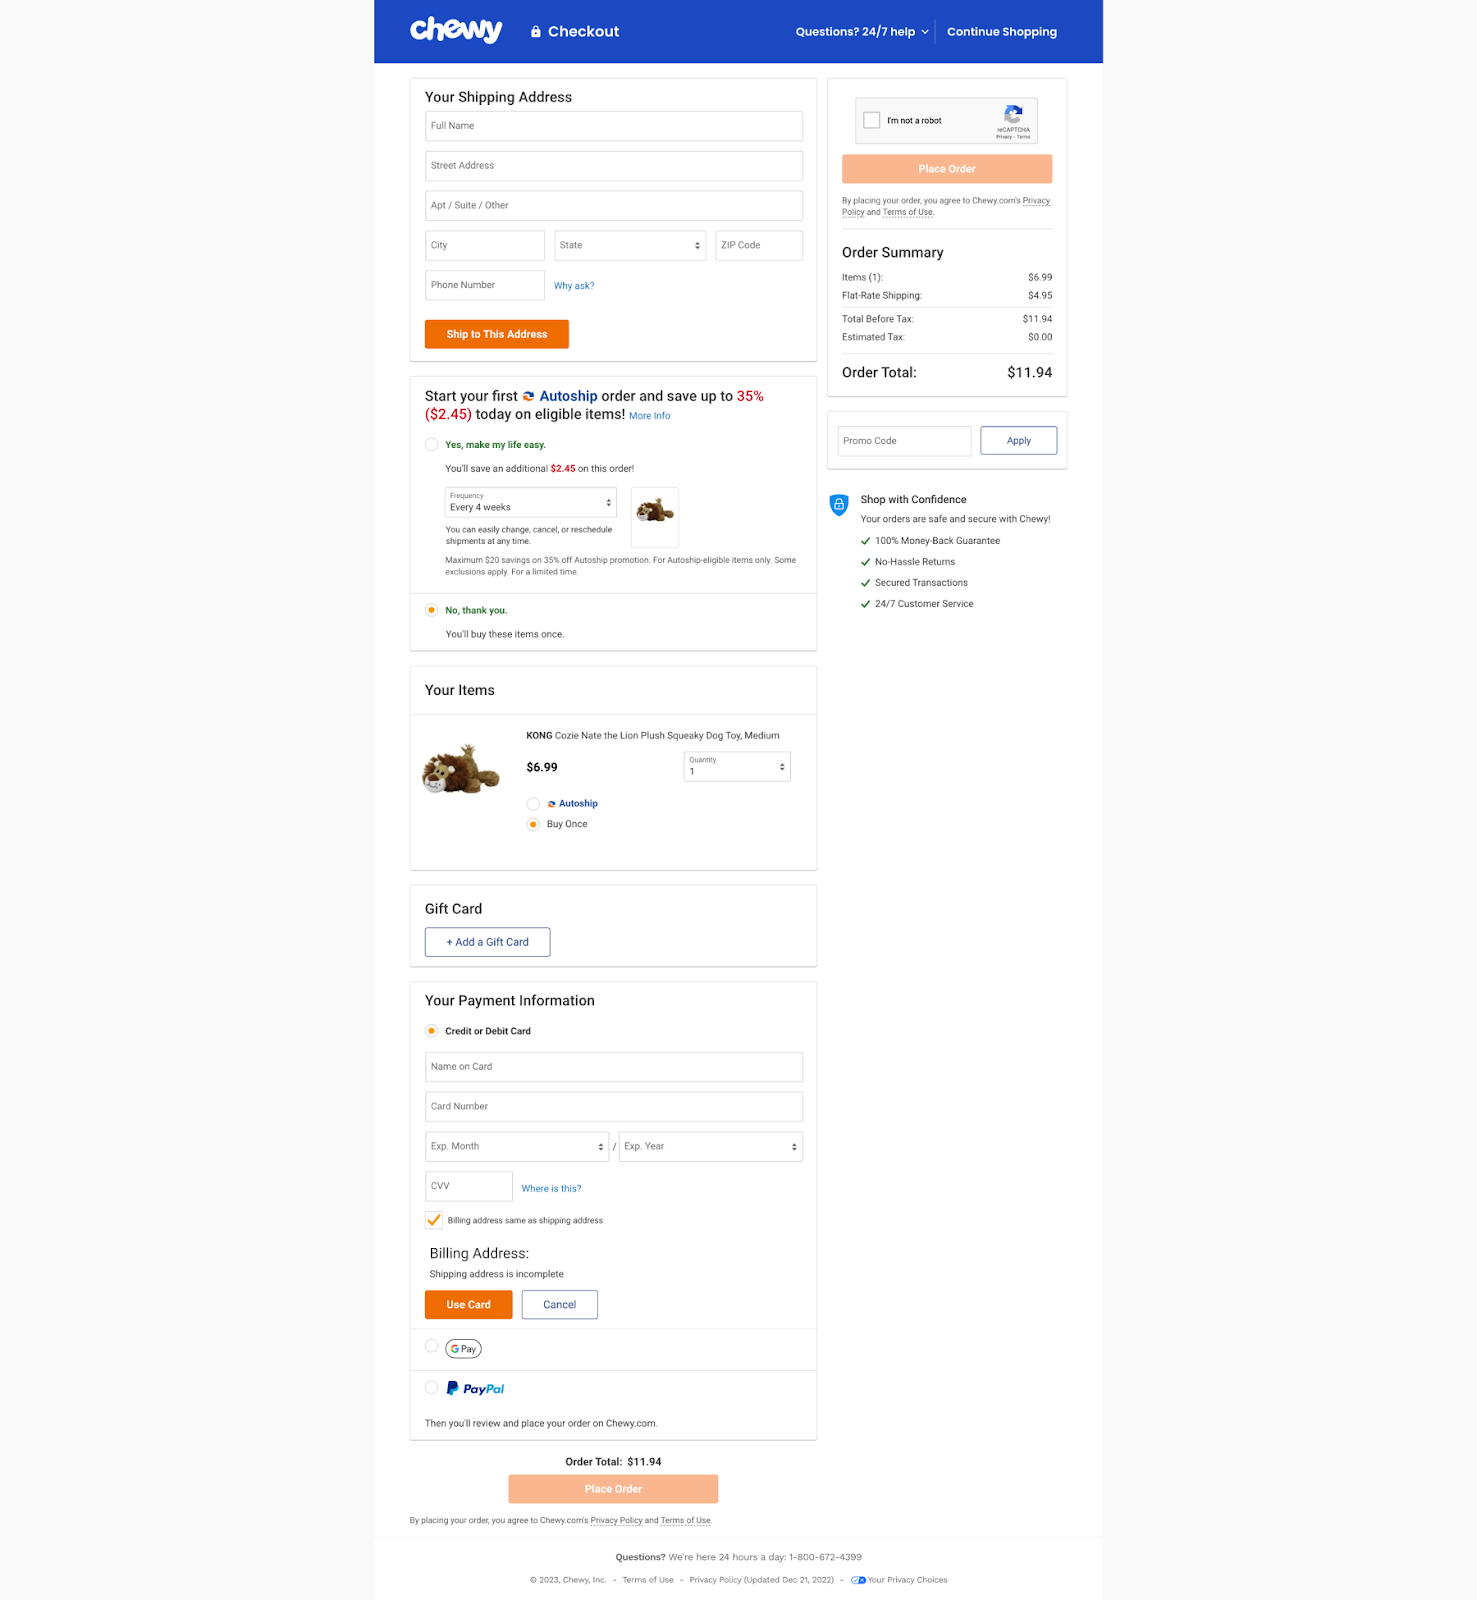 Example checkout page (Chewy)